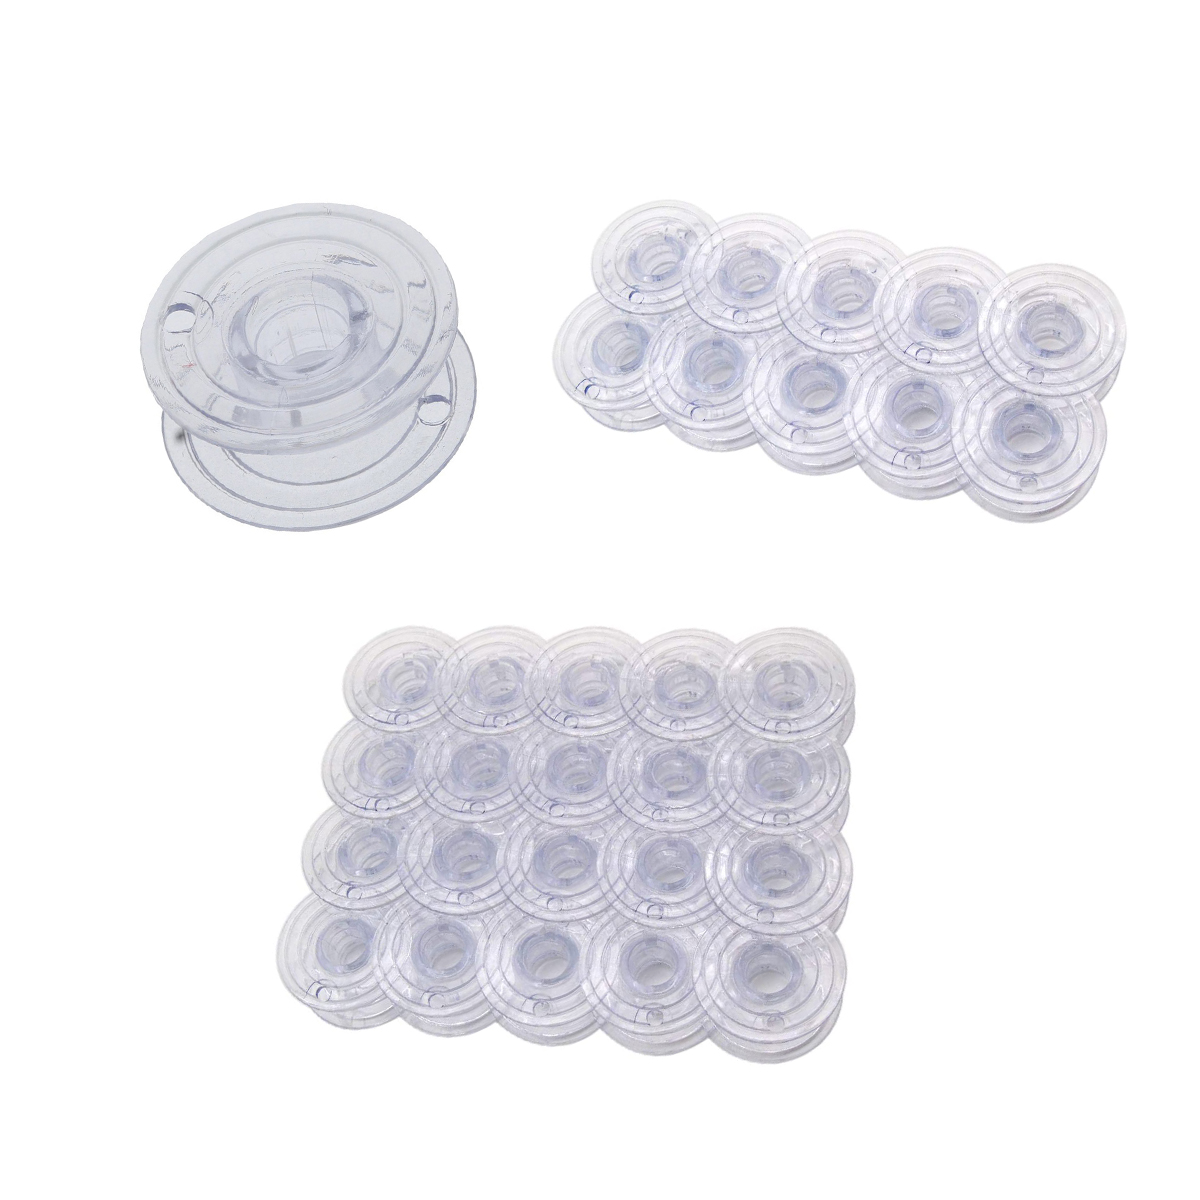 Class 15 Plastic Bobbins - Single, & 10 Pack Options Available